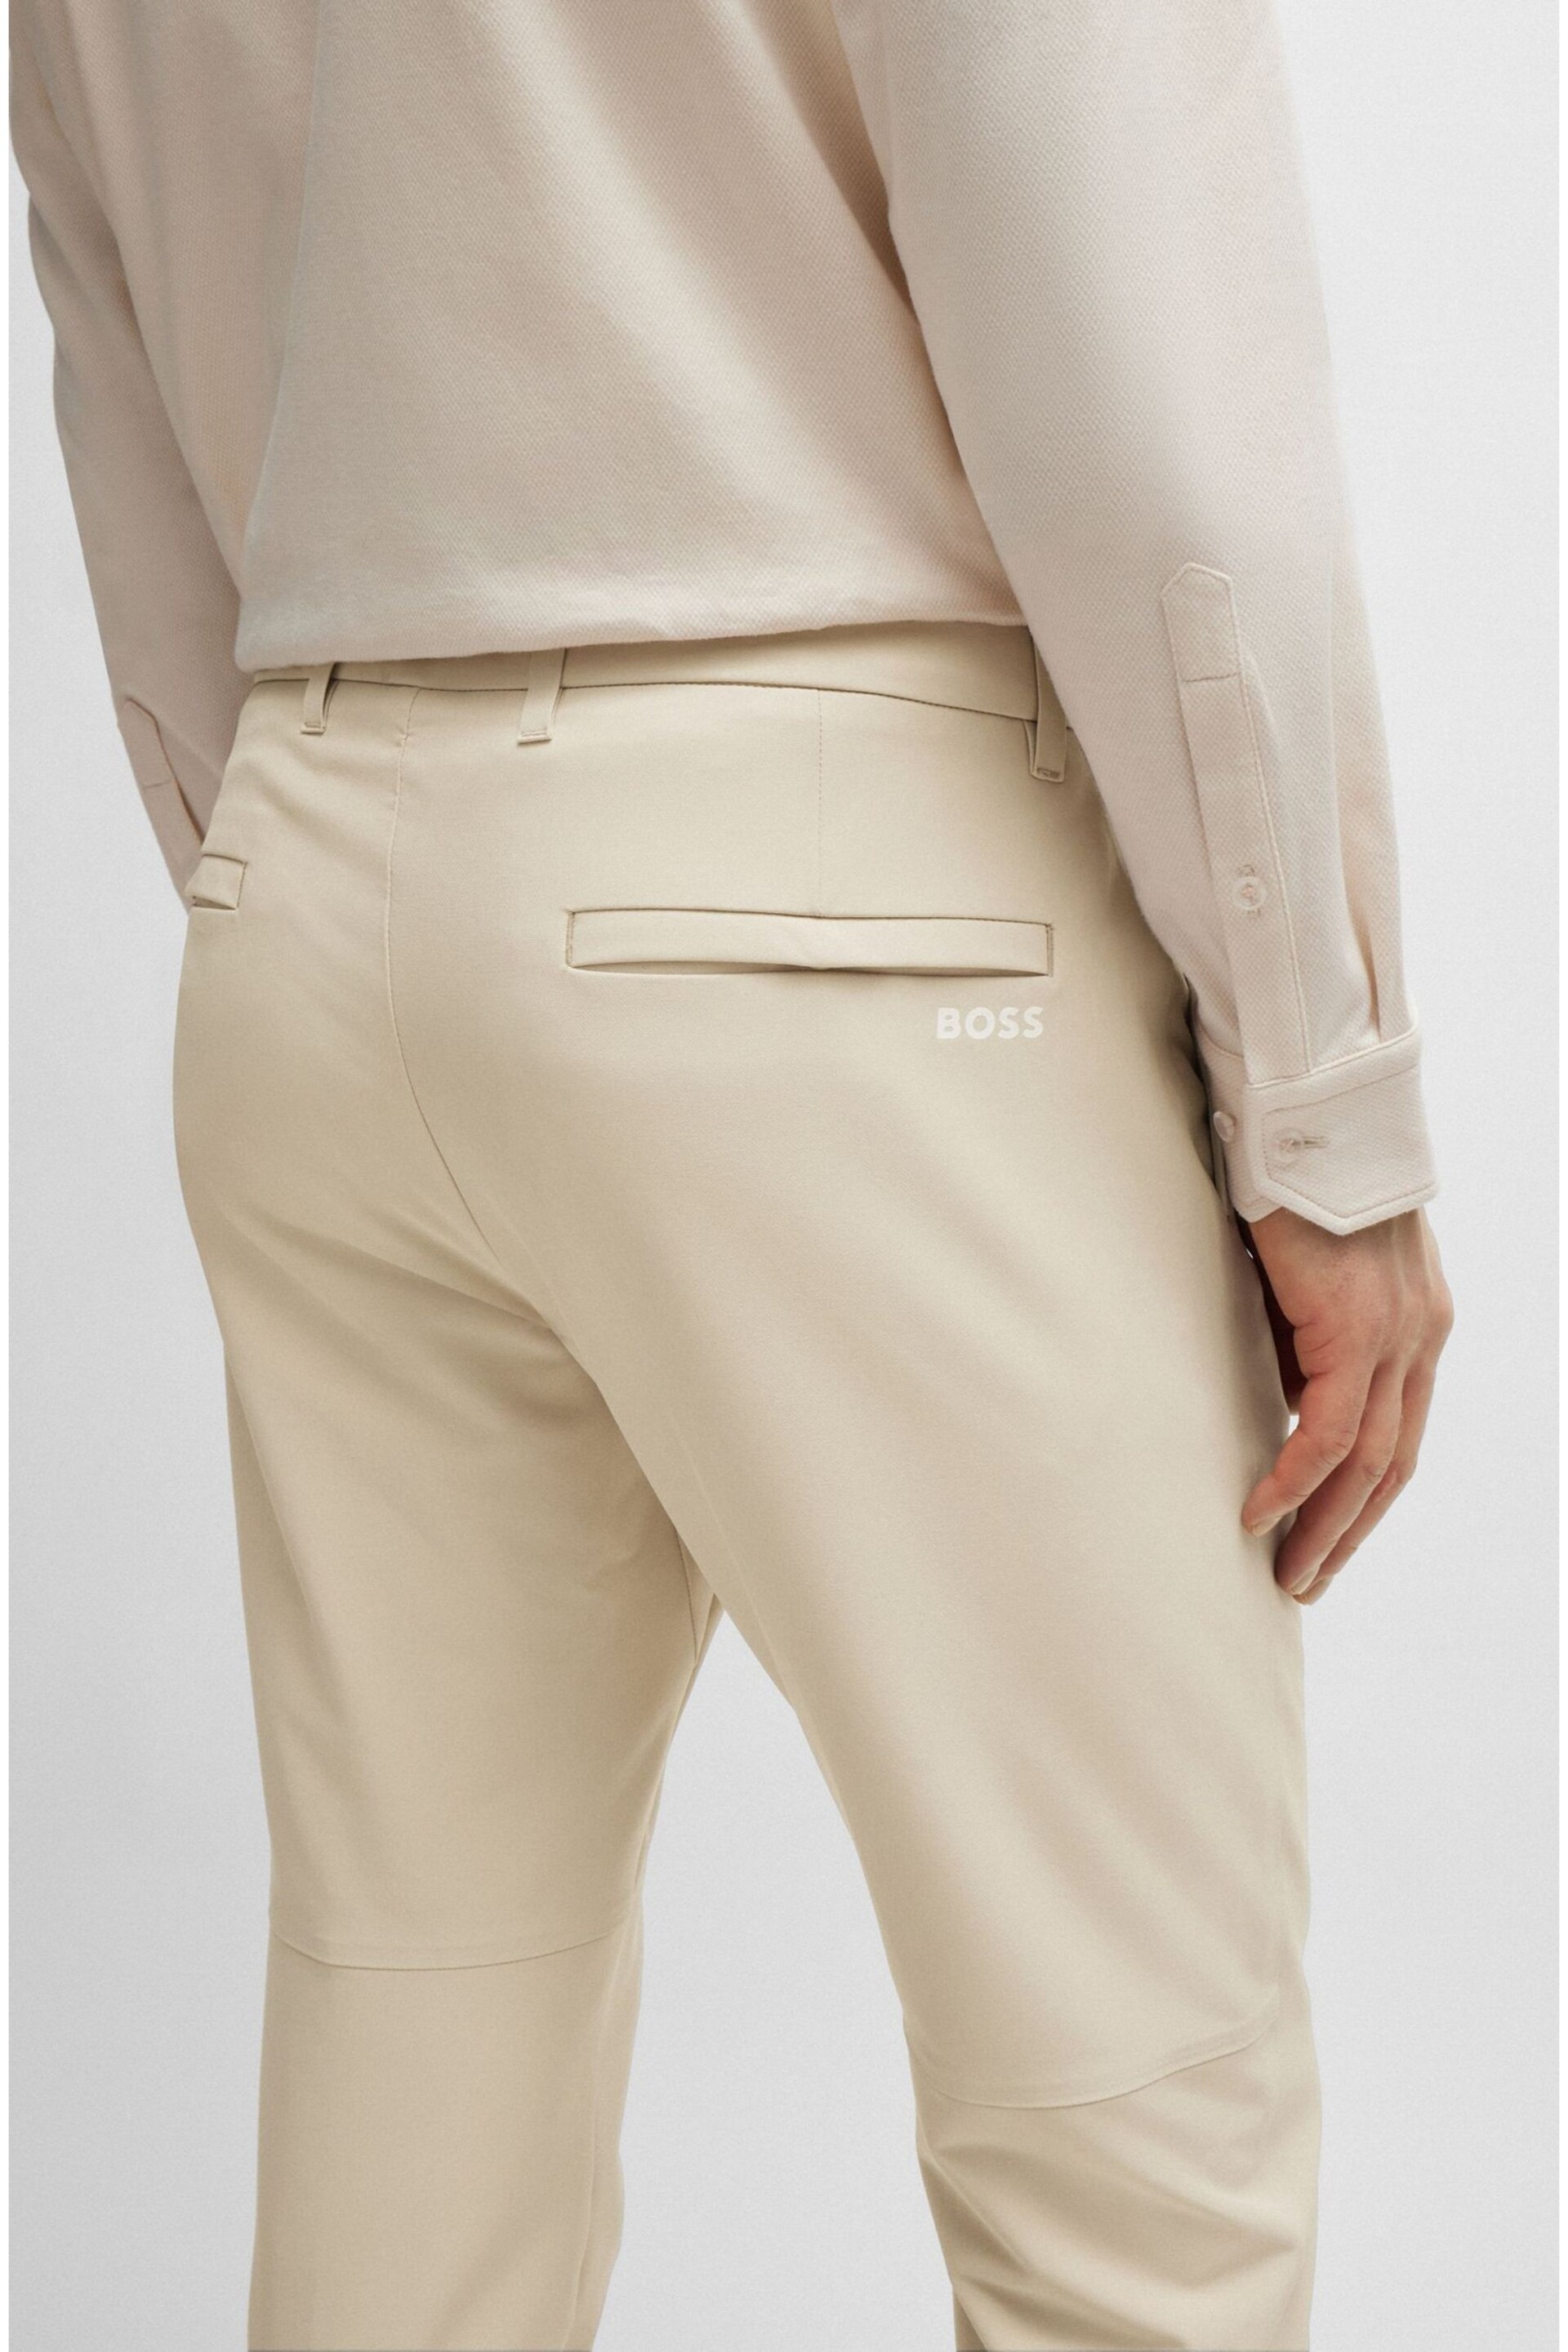 BOSS Cream Slim Fit Stretch Cotton Chino Trousers - Image 4 of 5